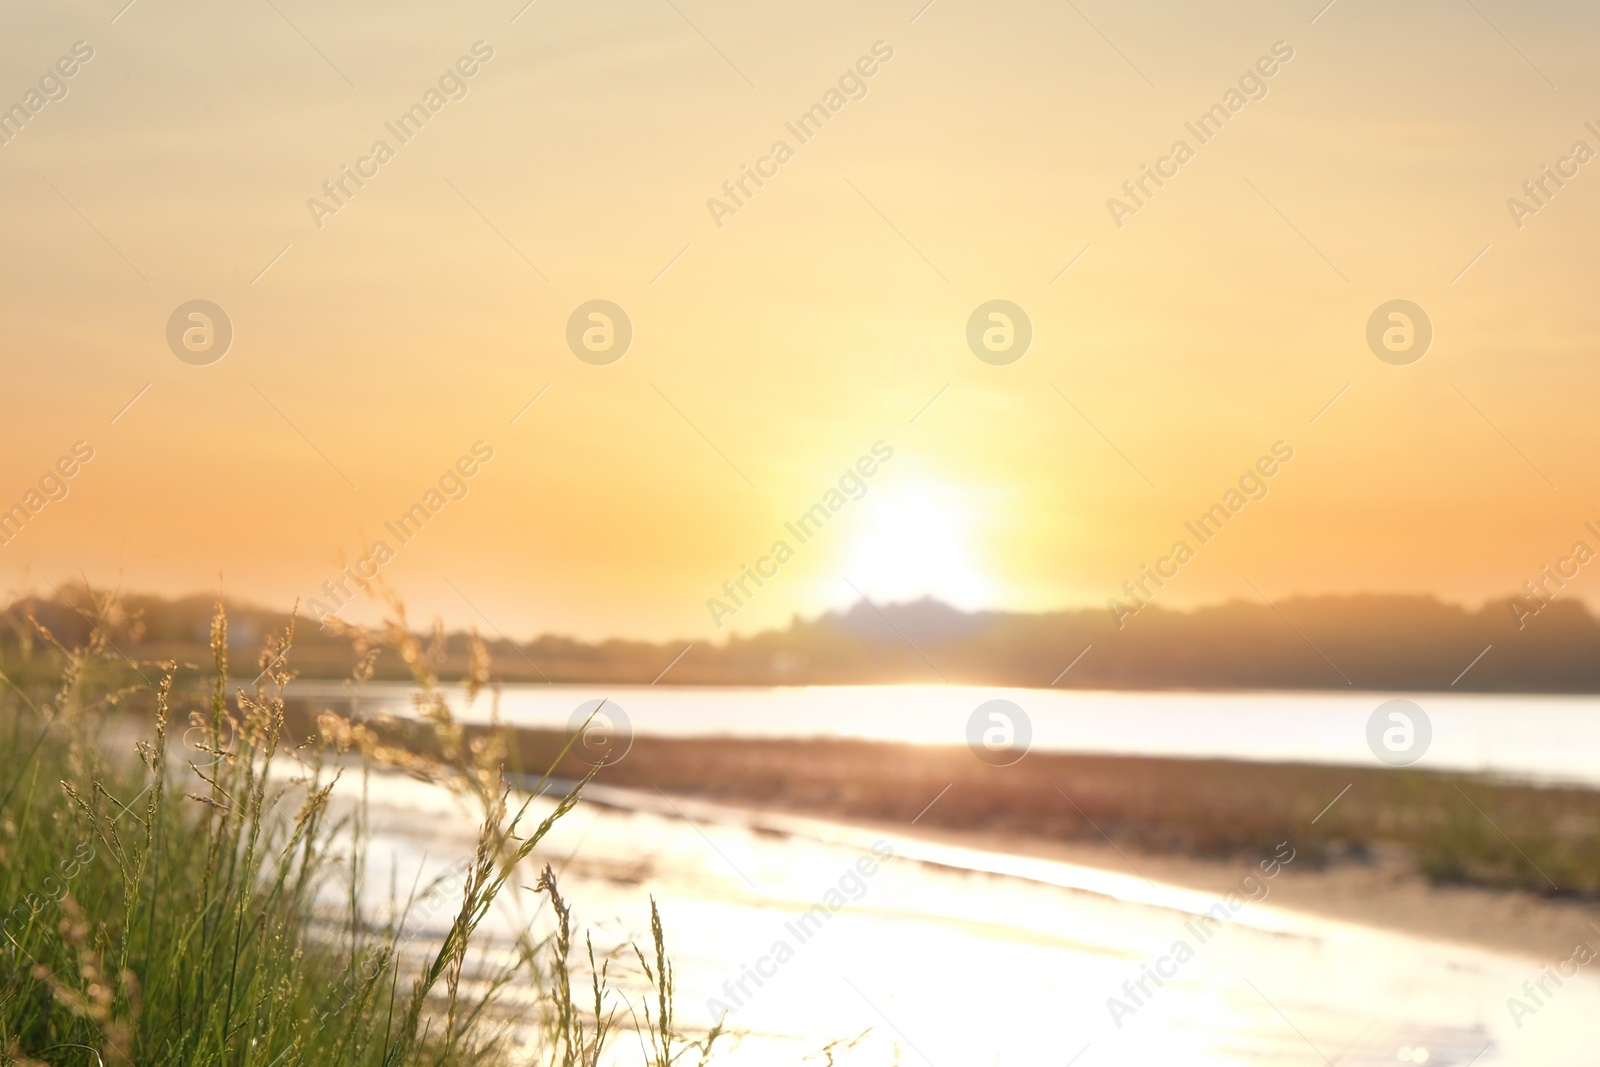 Photo of Picturesque landscape with beautiful sunlit lake, focus on grass